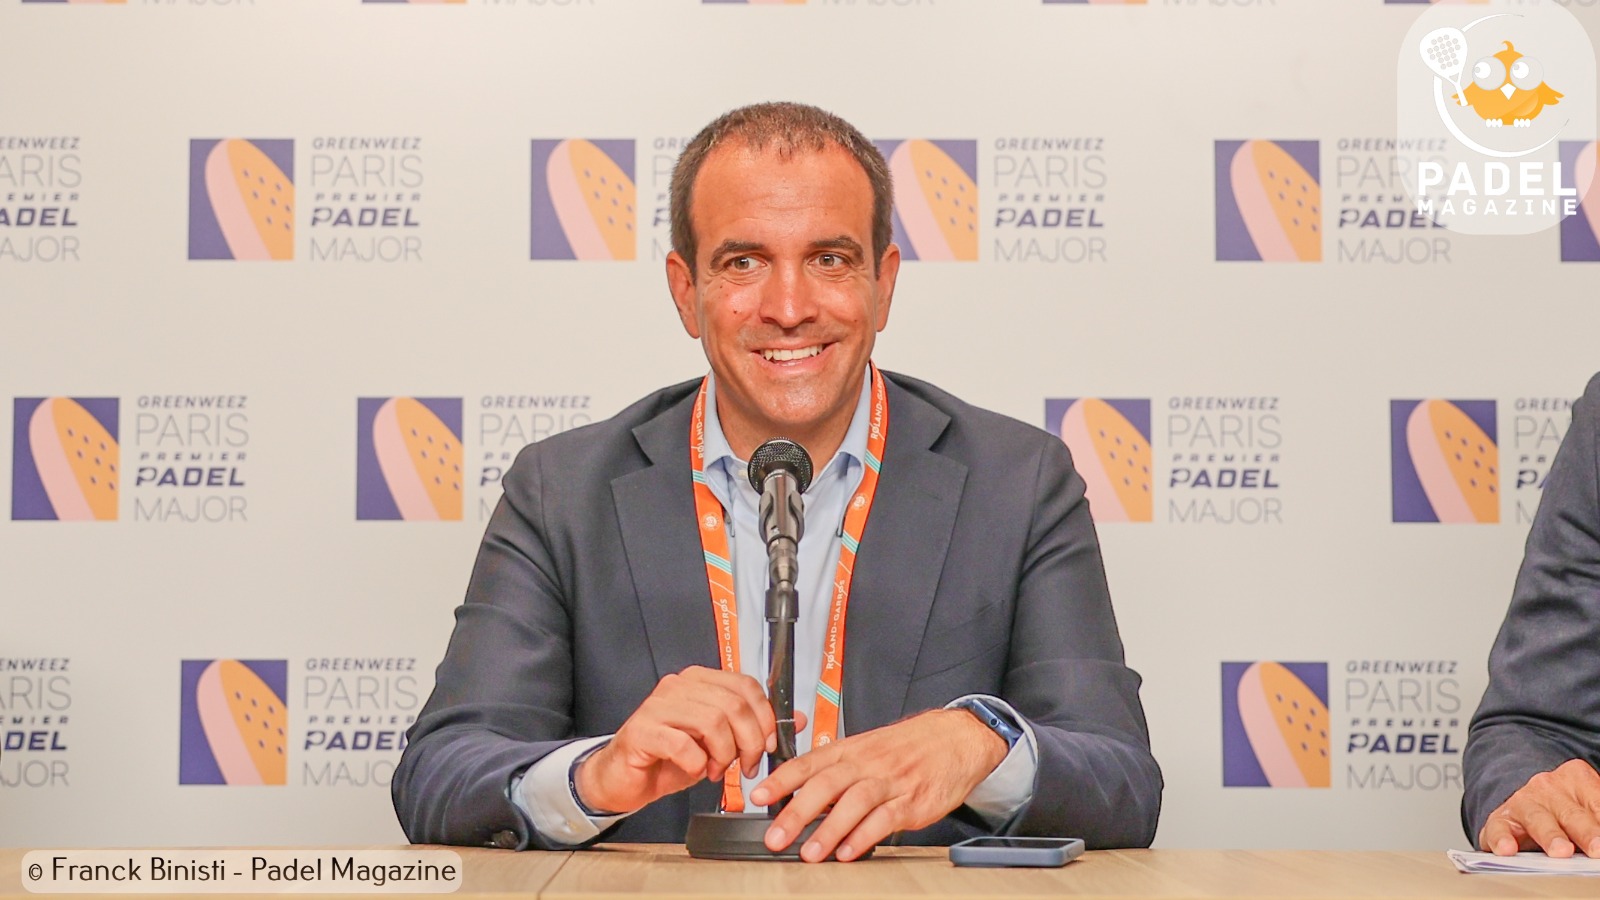 Luigi Carraro: “We have to create a Casa del padel during the Olympics”